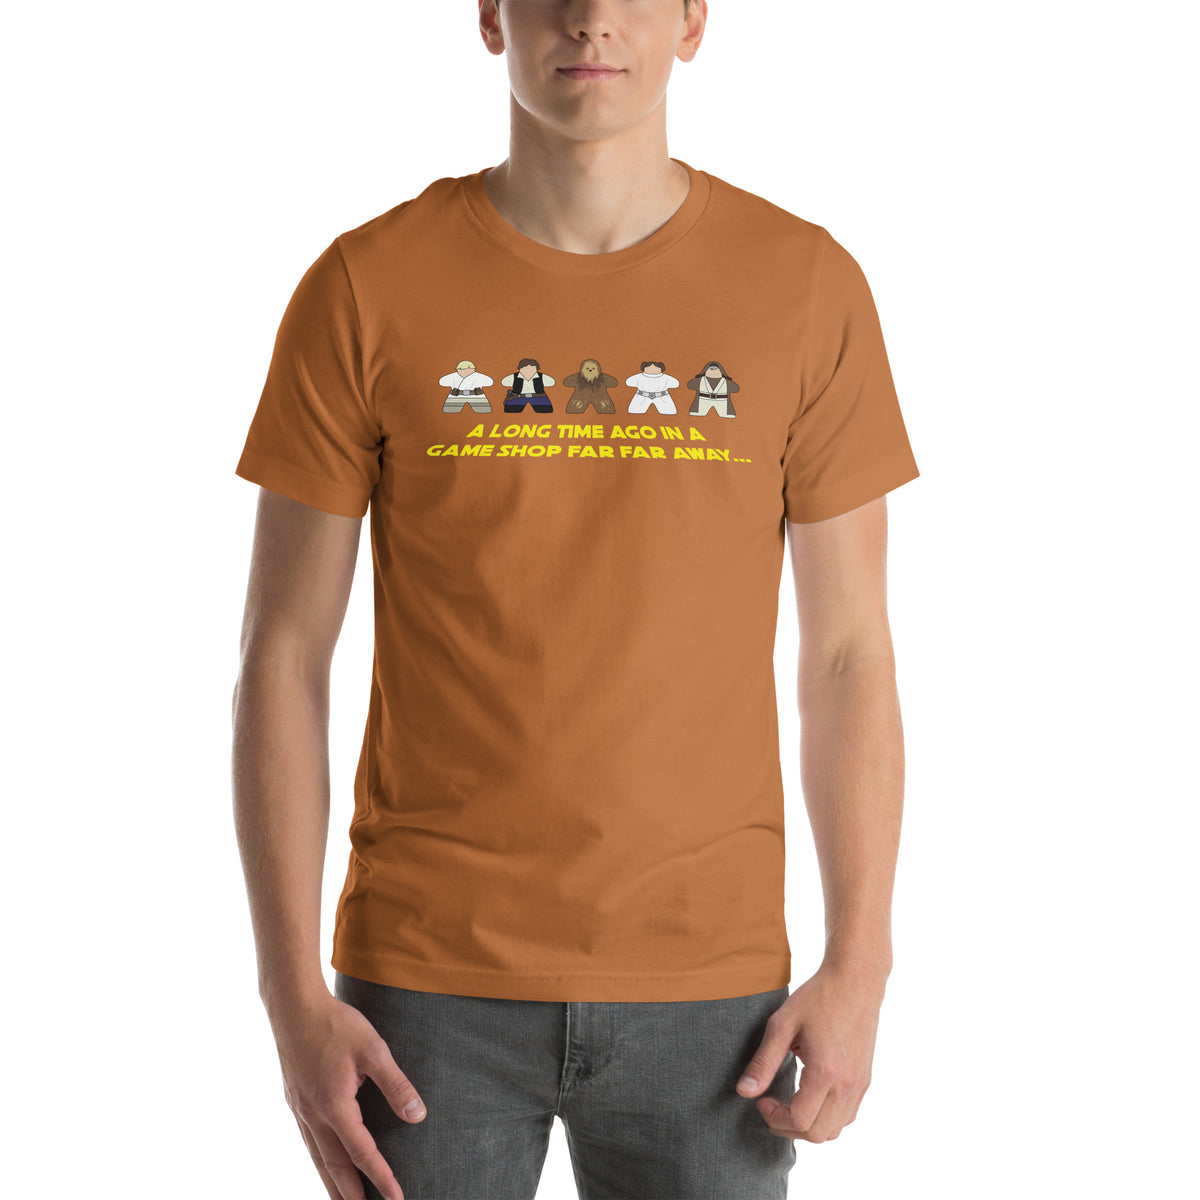 Bronze T-Shirt with Star Wars Meeples Parody Design on model